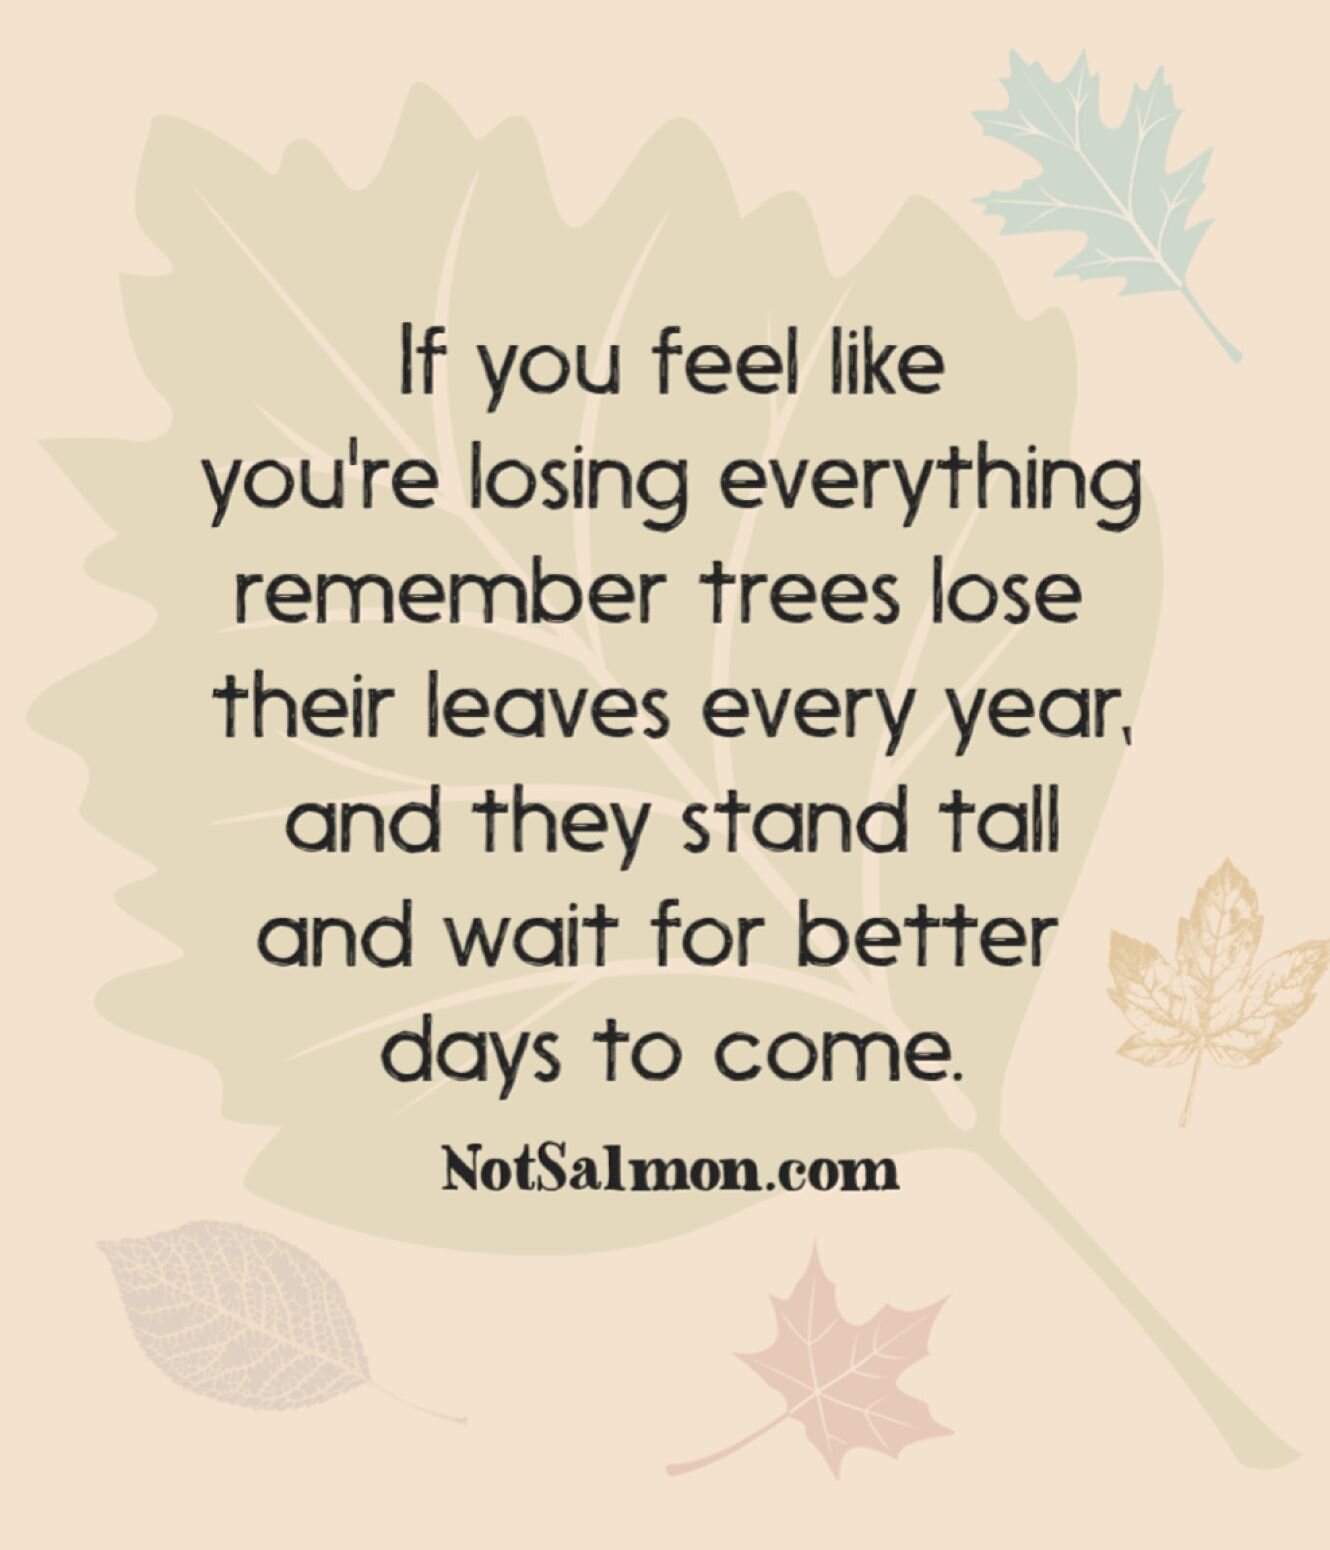 If you feel like you're losing everything remember trees lose their leaves every year, and they stand tall and wait for better days to come.